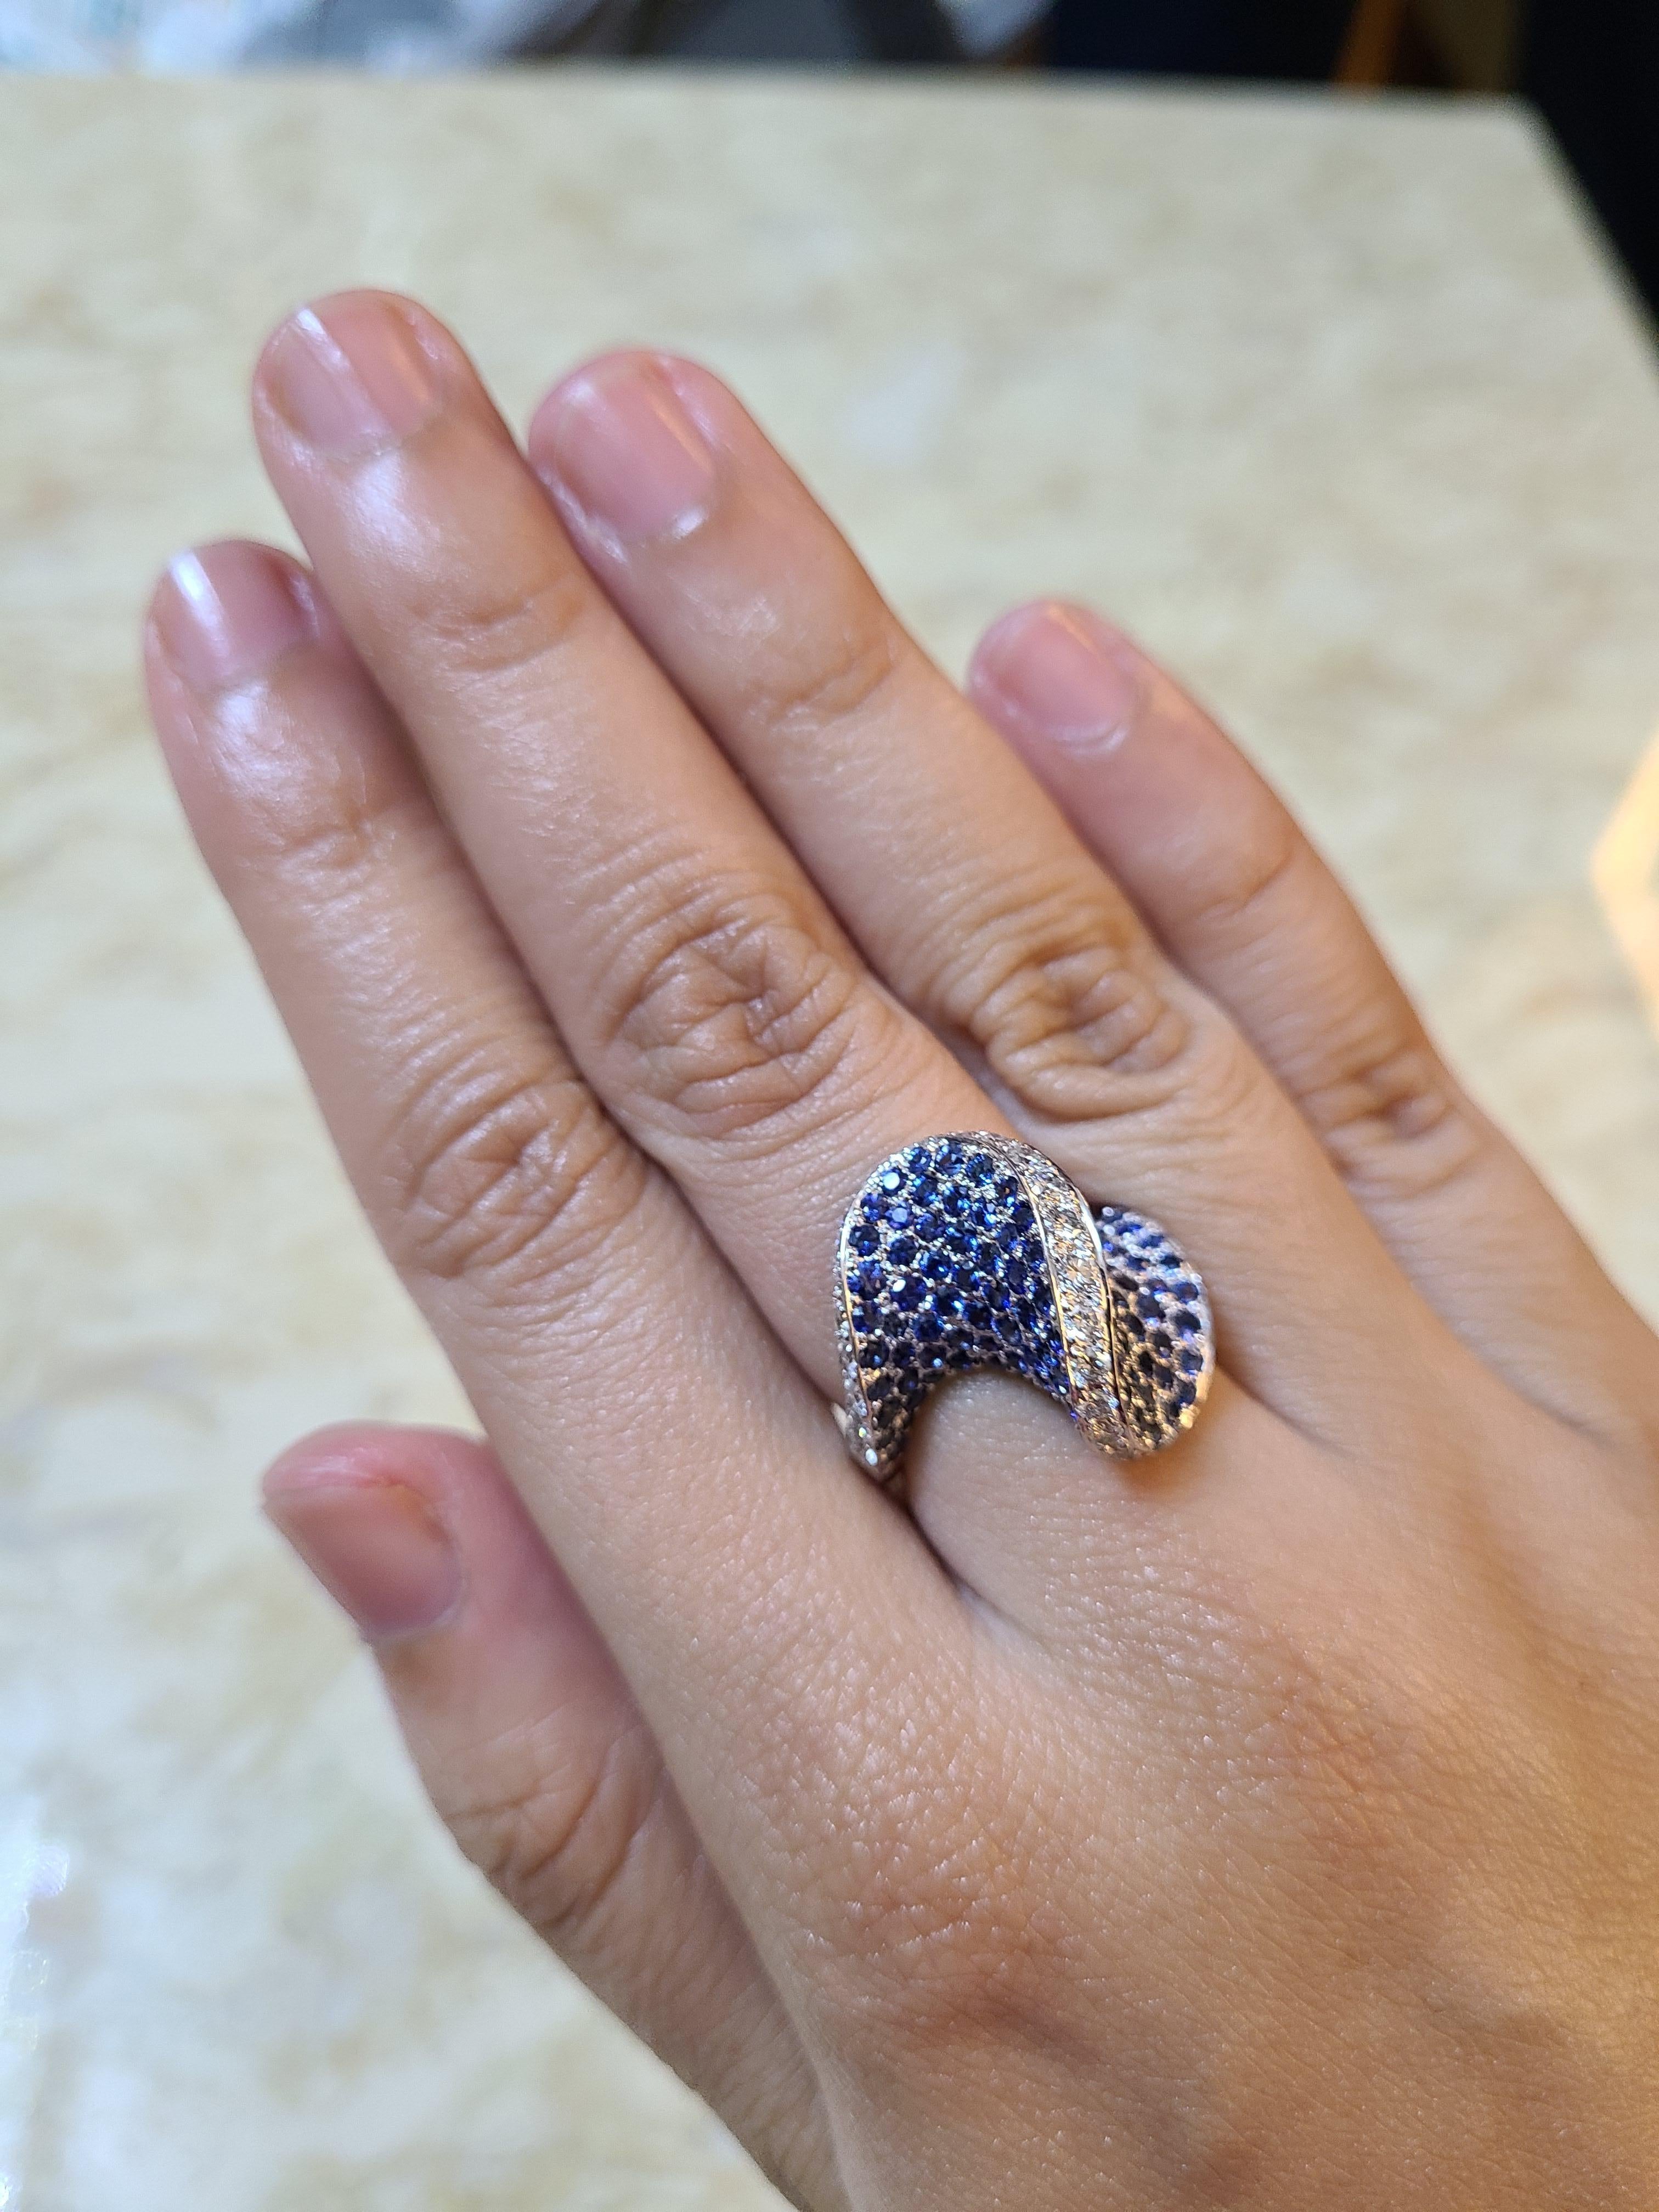 A modern and complex Ring design made in 18k white gold with blue sapphires and diamonds . The ring finish is high quality with exceptional craftsmanship . Complex design yet made easy to wear . The blue sapphire weight in the ring is 4.21 carats